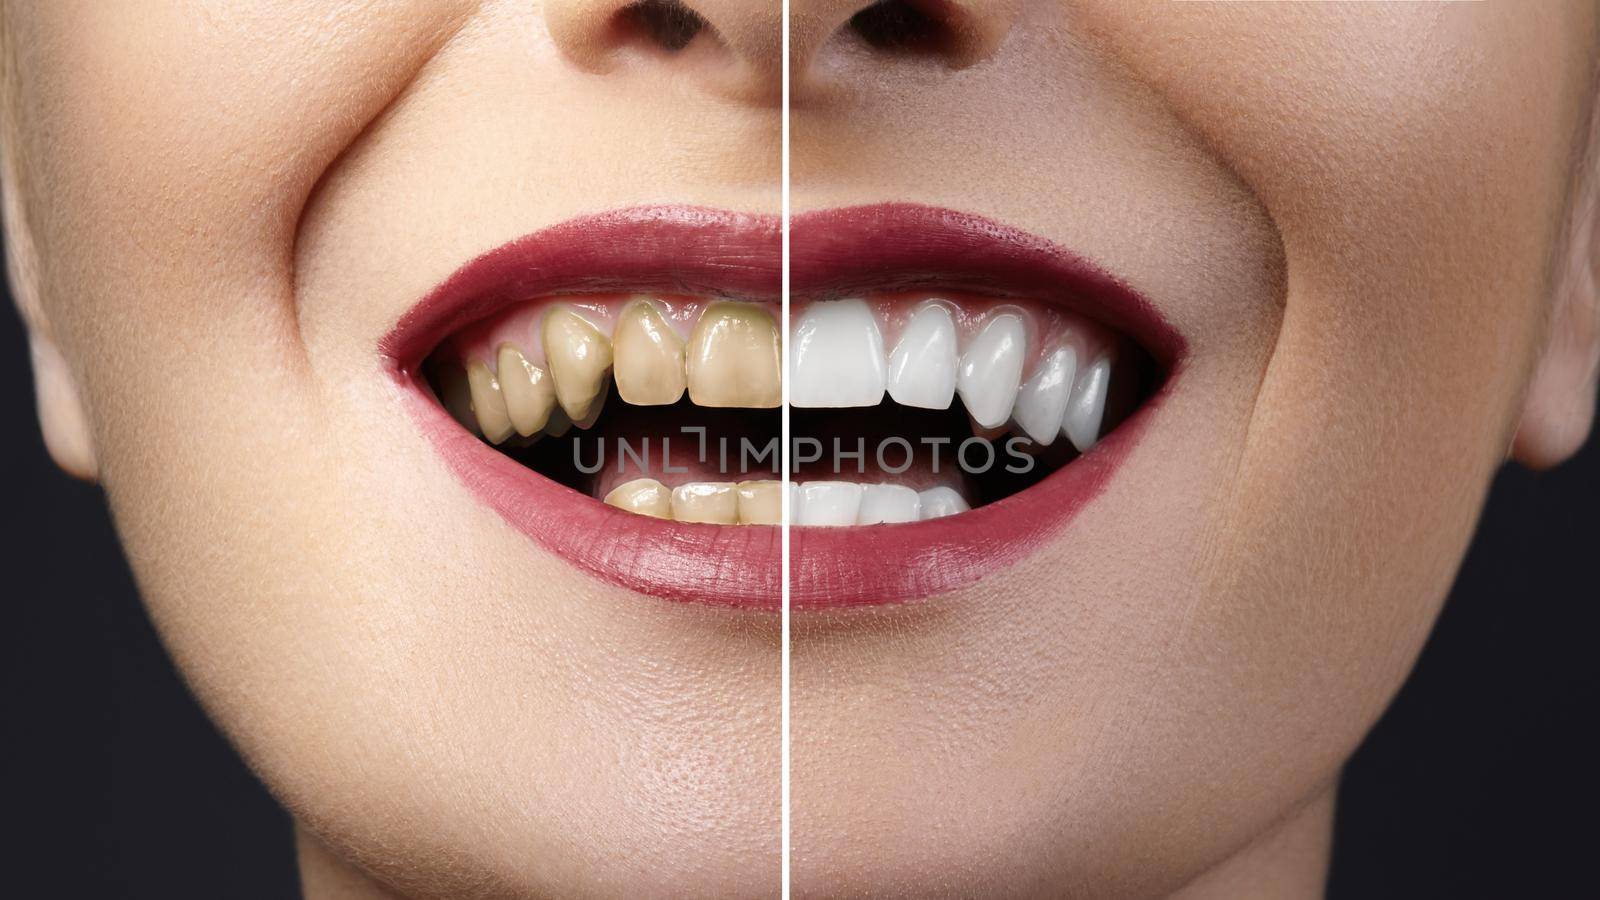 Close-up photo before and after whitening treatment or dental veneers procedure on teeth. Health Care collage of human mouth. Caries therapy